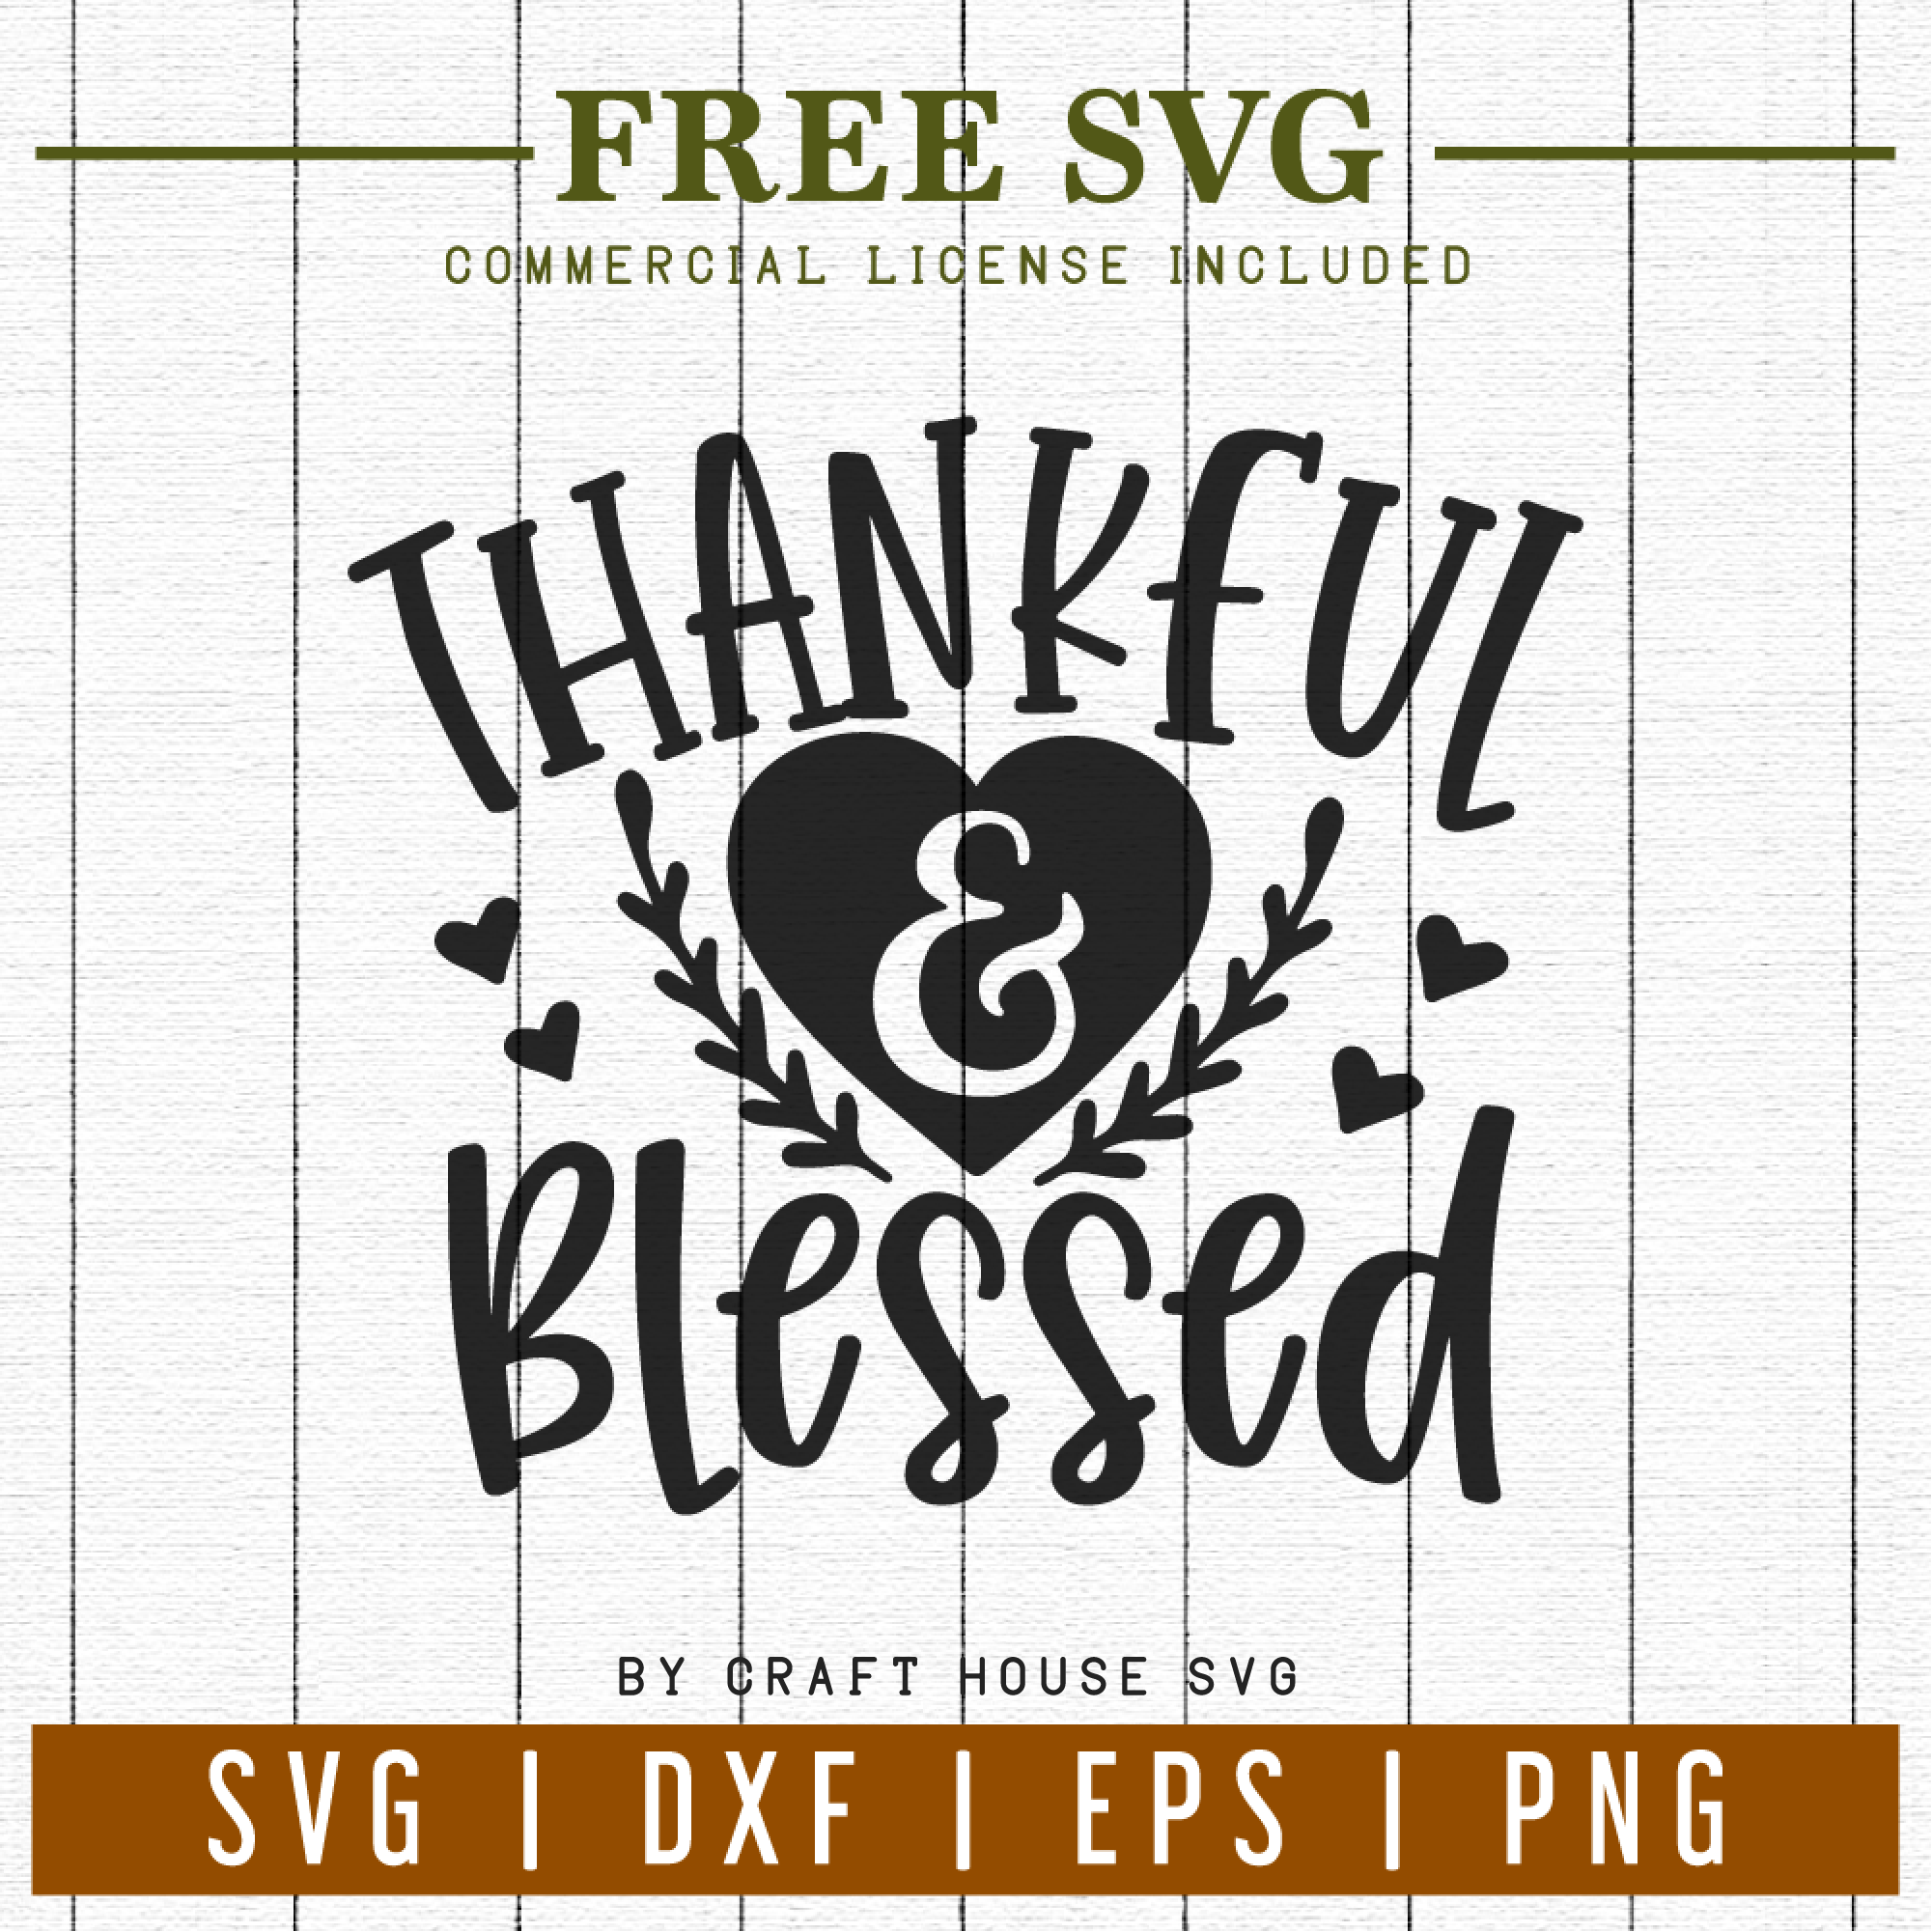 FREE | Thankful and Blessed SVG | FB1 Craft House SVG - SVG files for Cricut and Silhouette